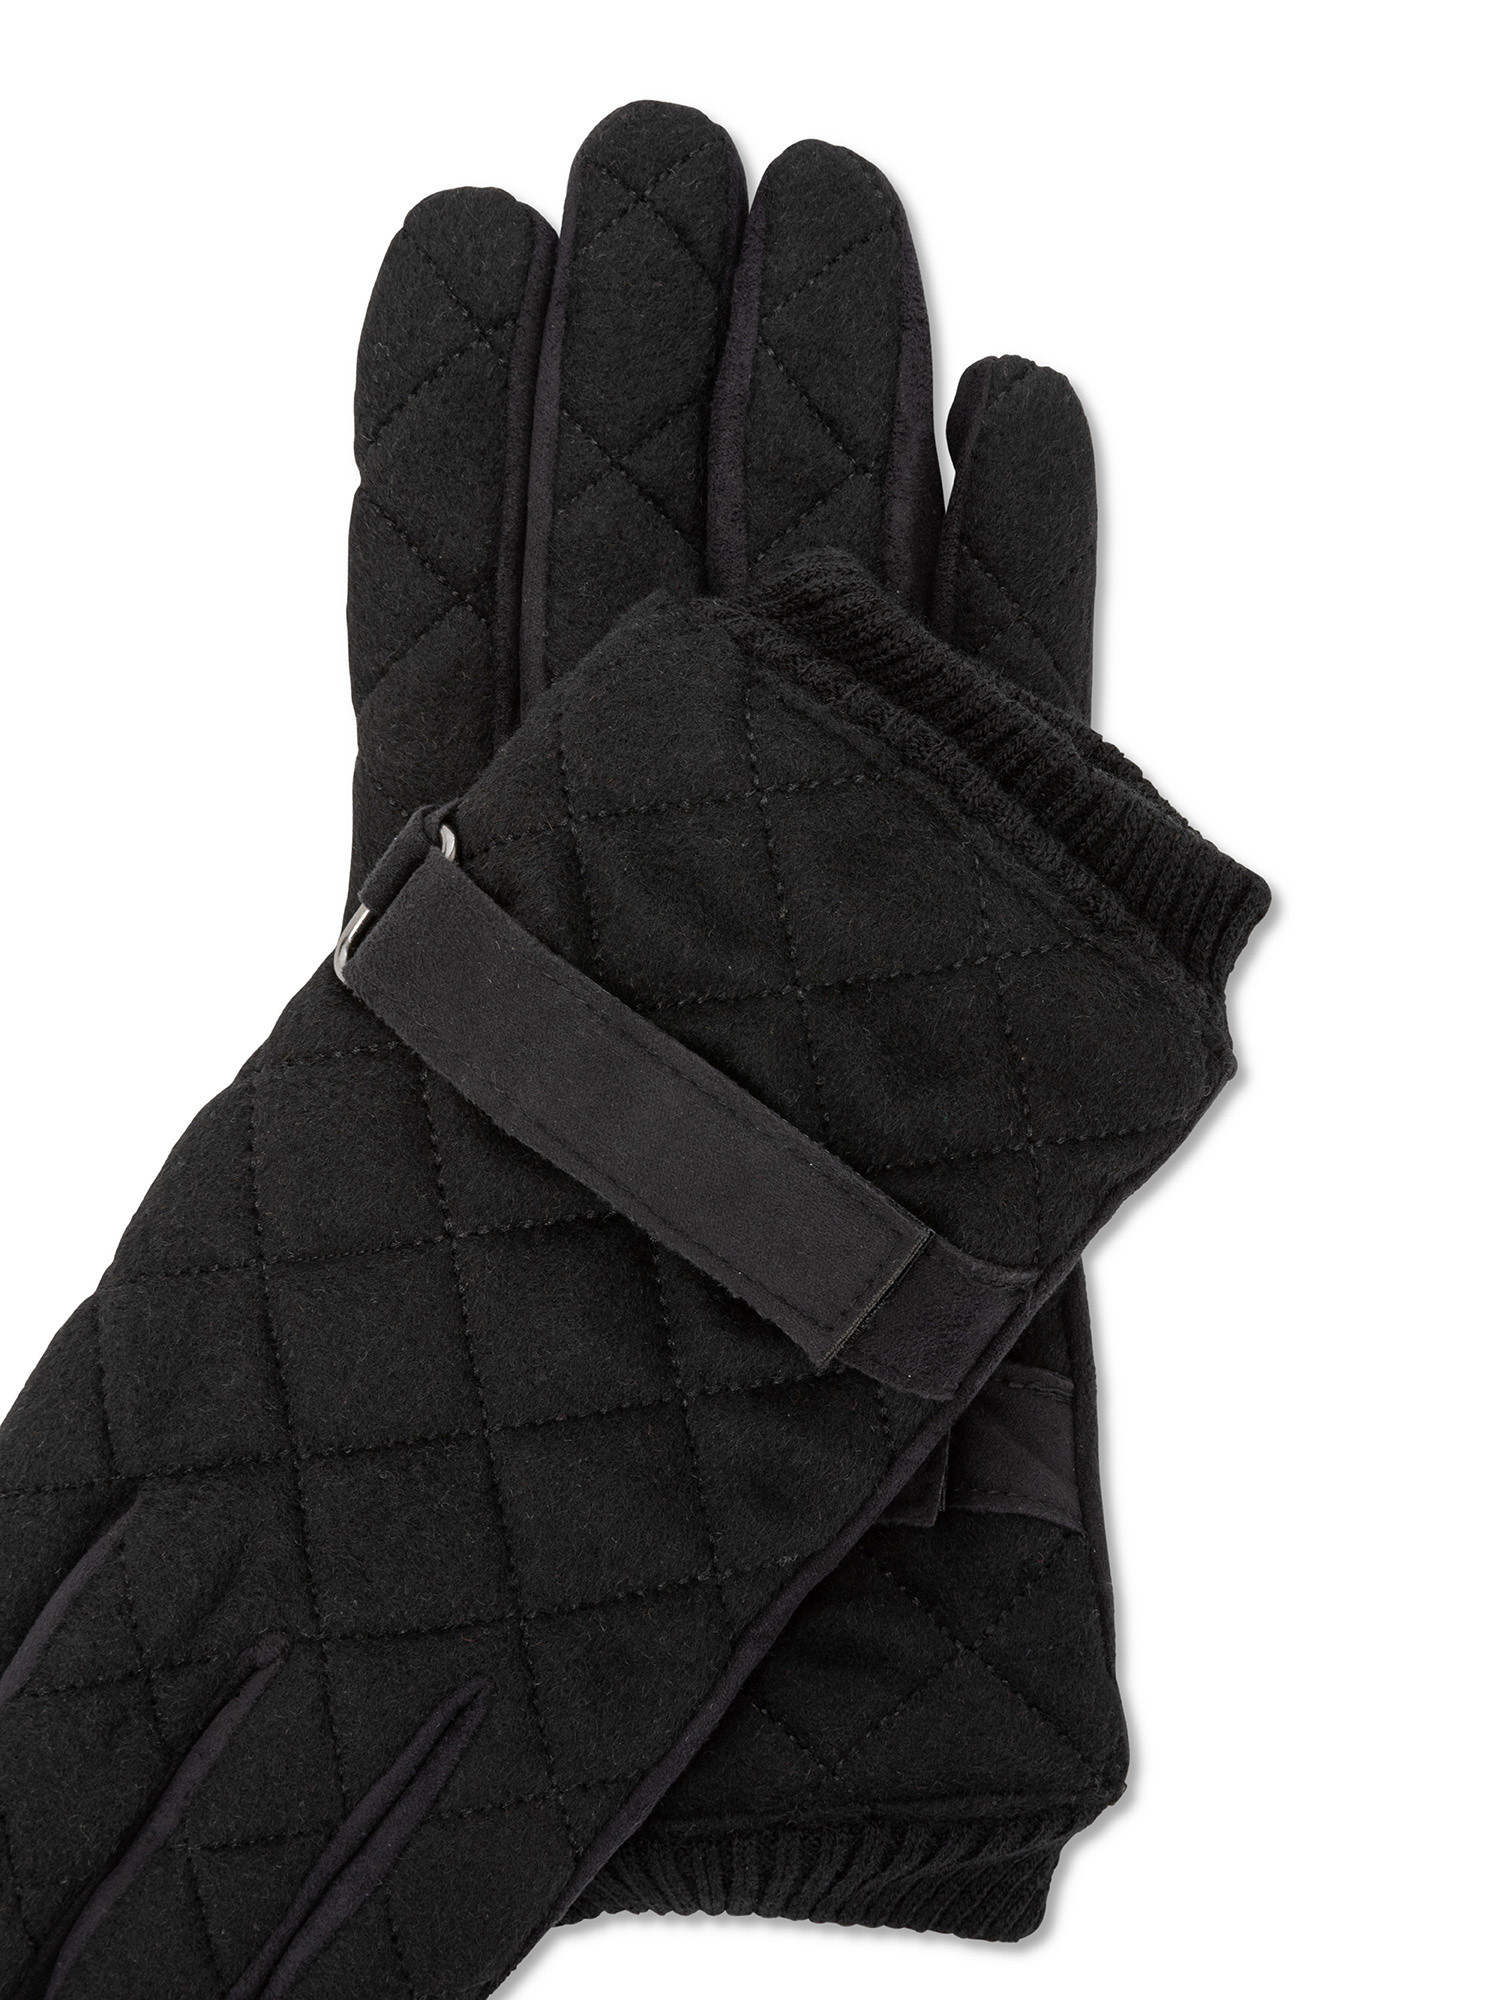 Luca D'Altieri - Quilted suede gloves, Black, large image number 1